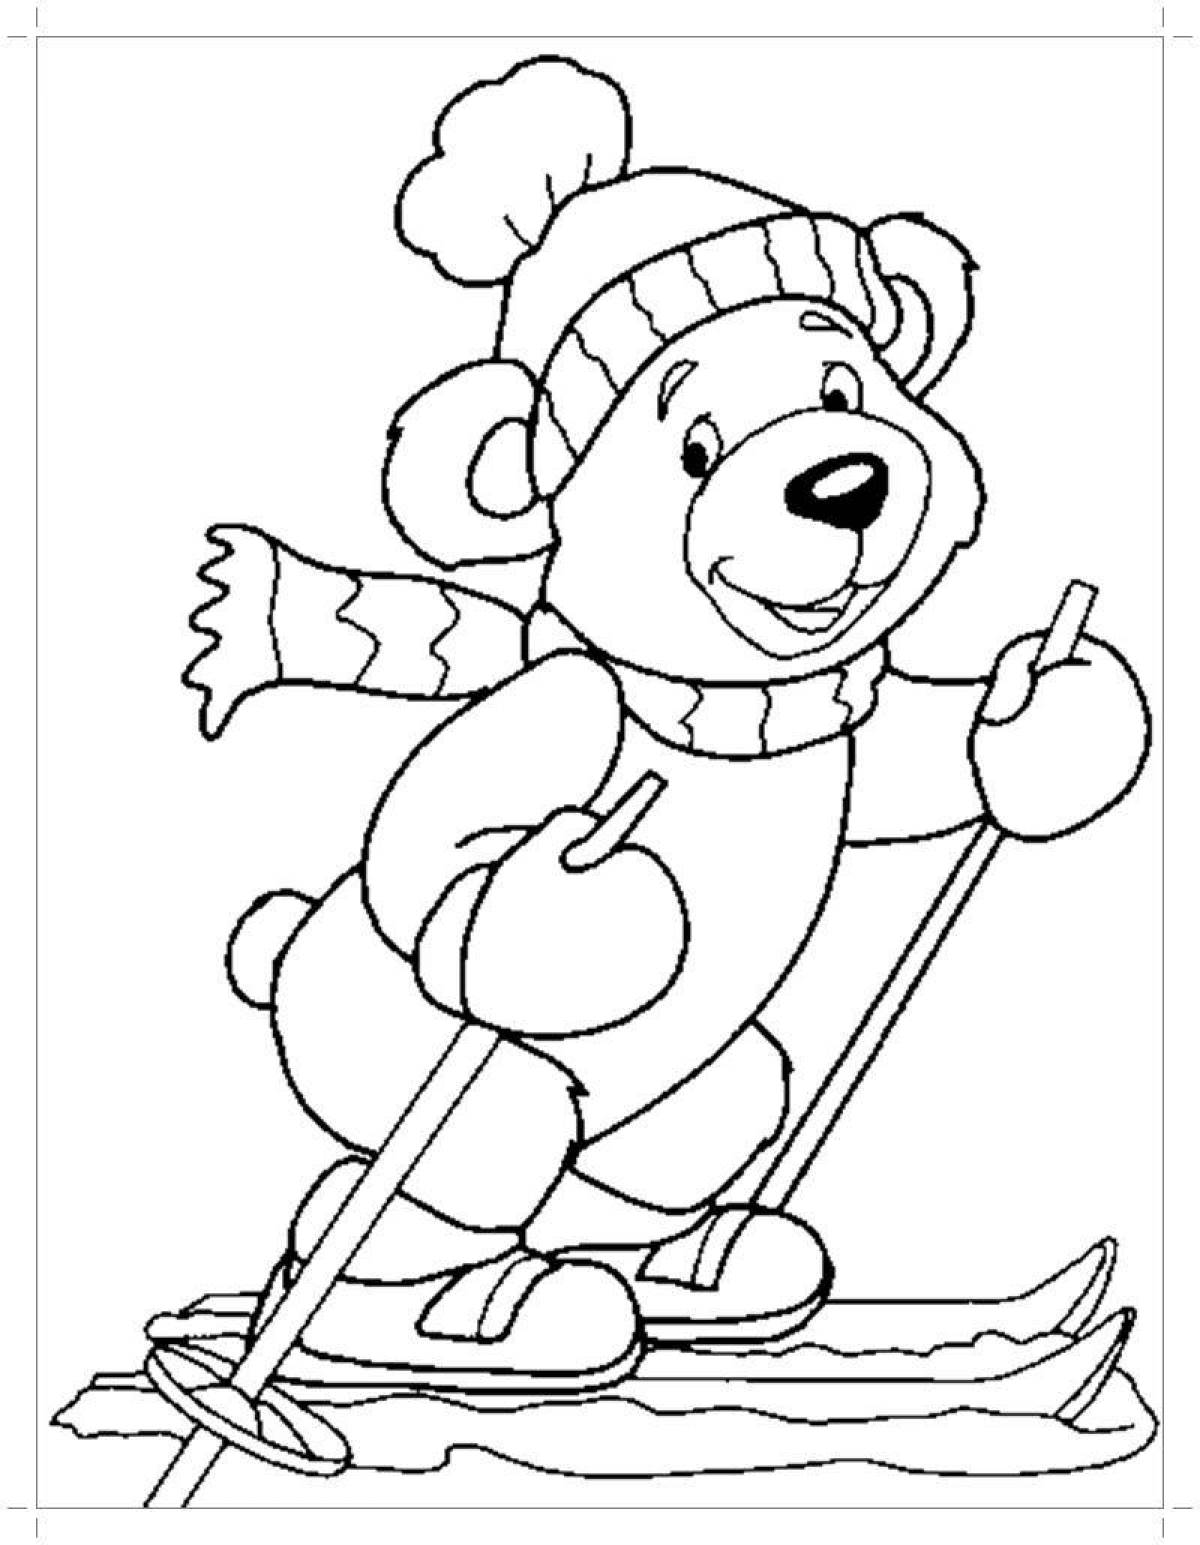 Live coloring for children winter 2 3 years